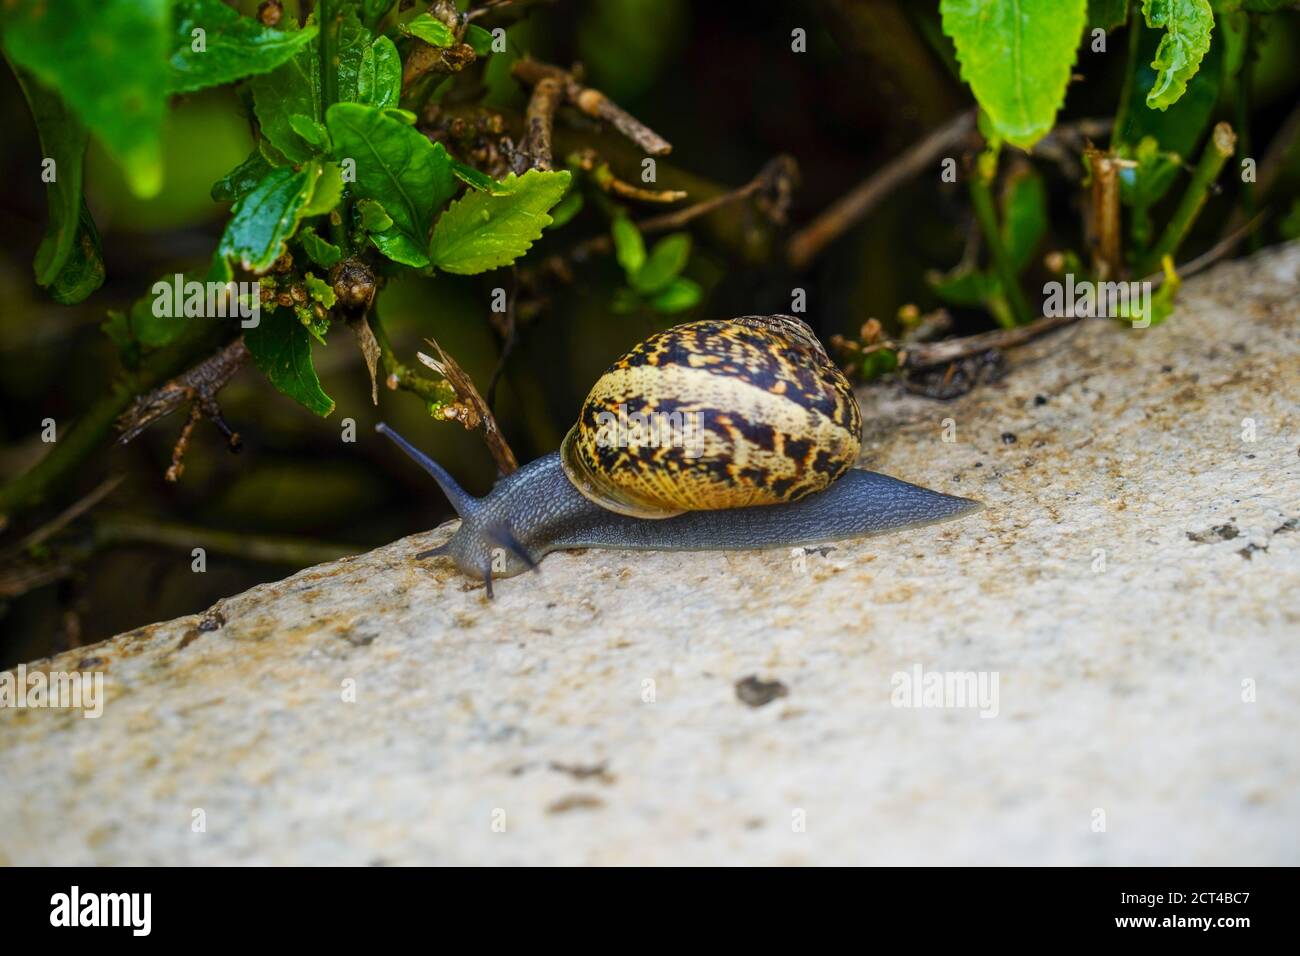 Snail (Helix engaddensis) crawls on a rock. Helix engaddensis is a species of snail common in the Levant, both in Mediterranean, desert and montane cl Stock Photo